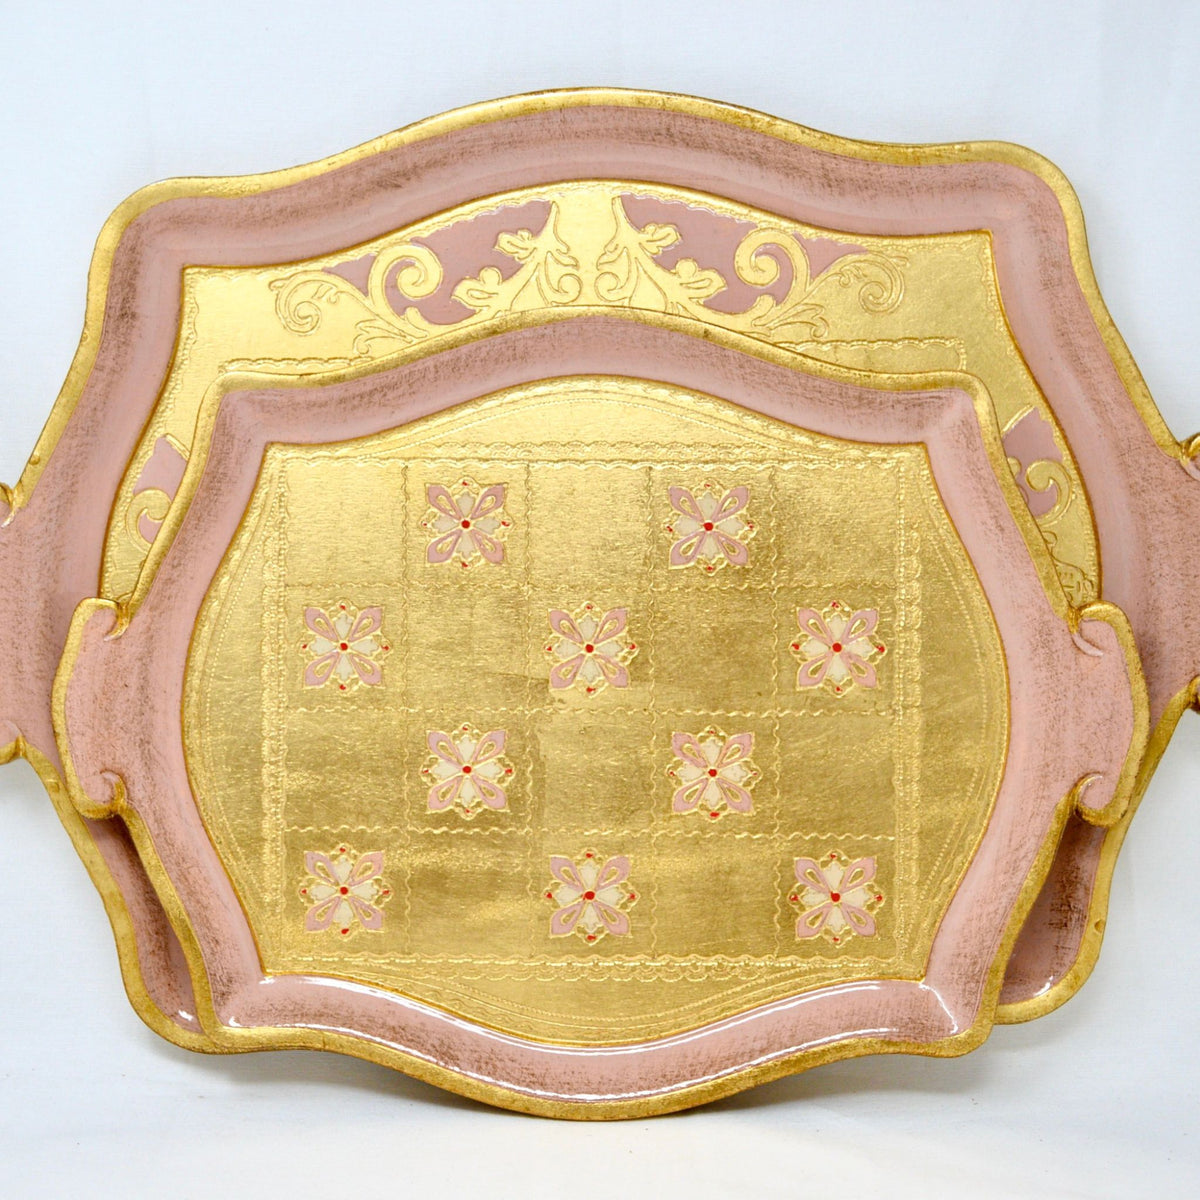 Florentine Carved Wood Pink Tray, Large or Small, Made in Italy - My Italian Decor